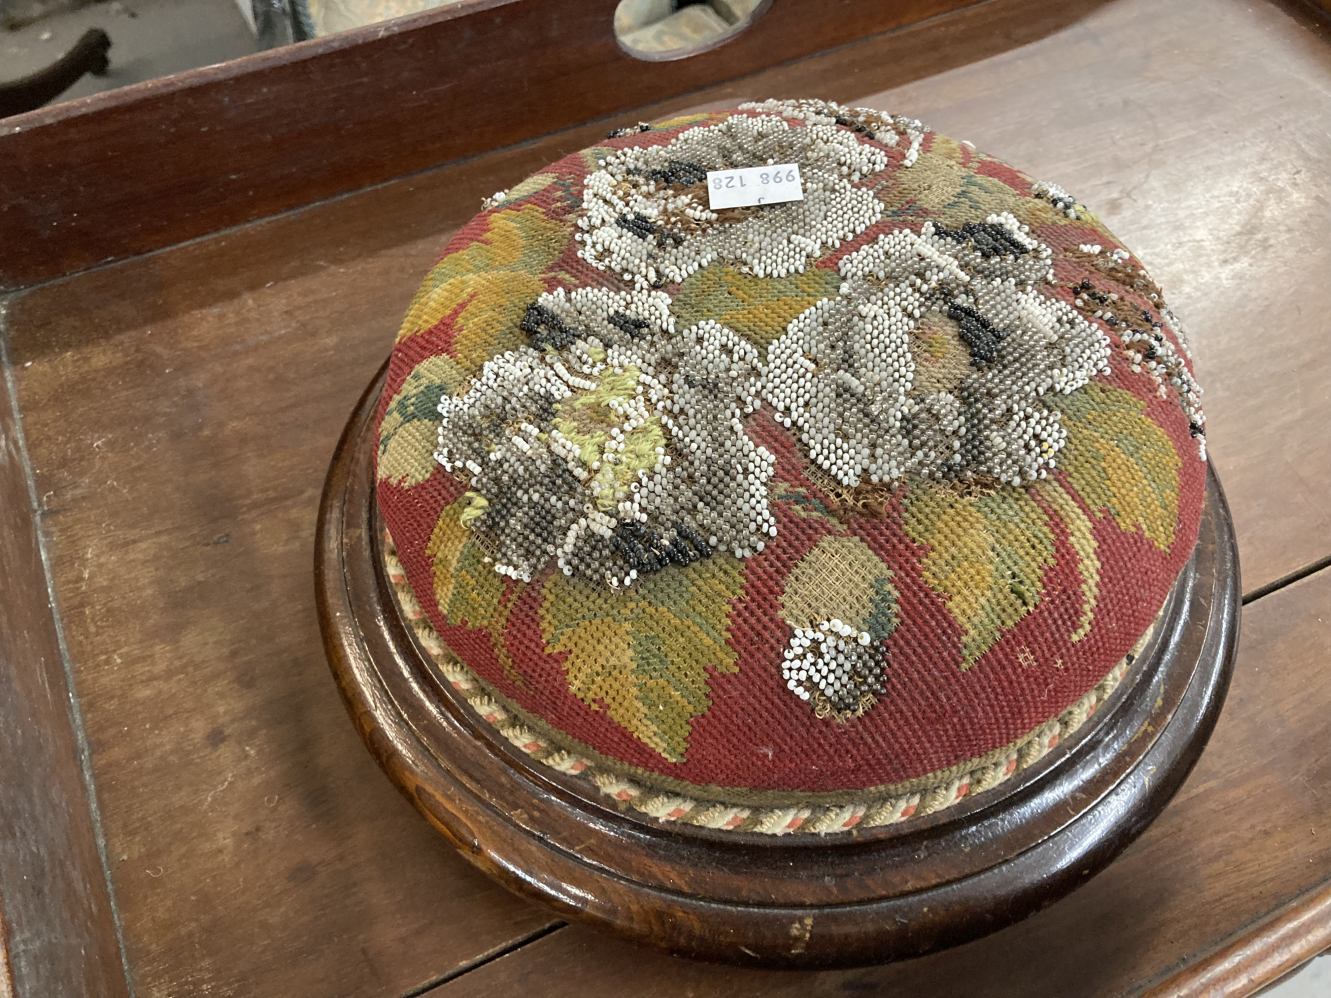 19th cent. Mahogany butler's tray and stand plus a Berlin bead footstool. - Image 3 of 3